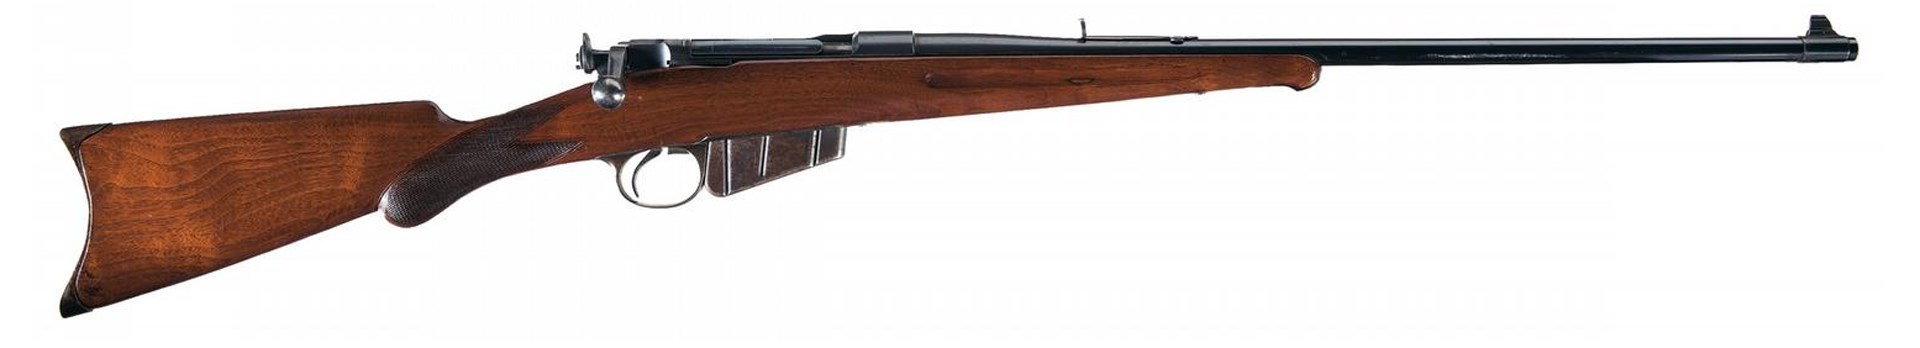 Right-side view of Remington-Lee sporter rifle wood stock gun bolt-action